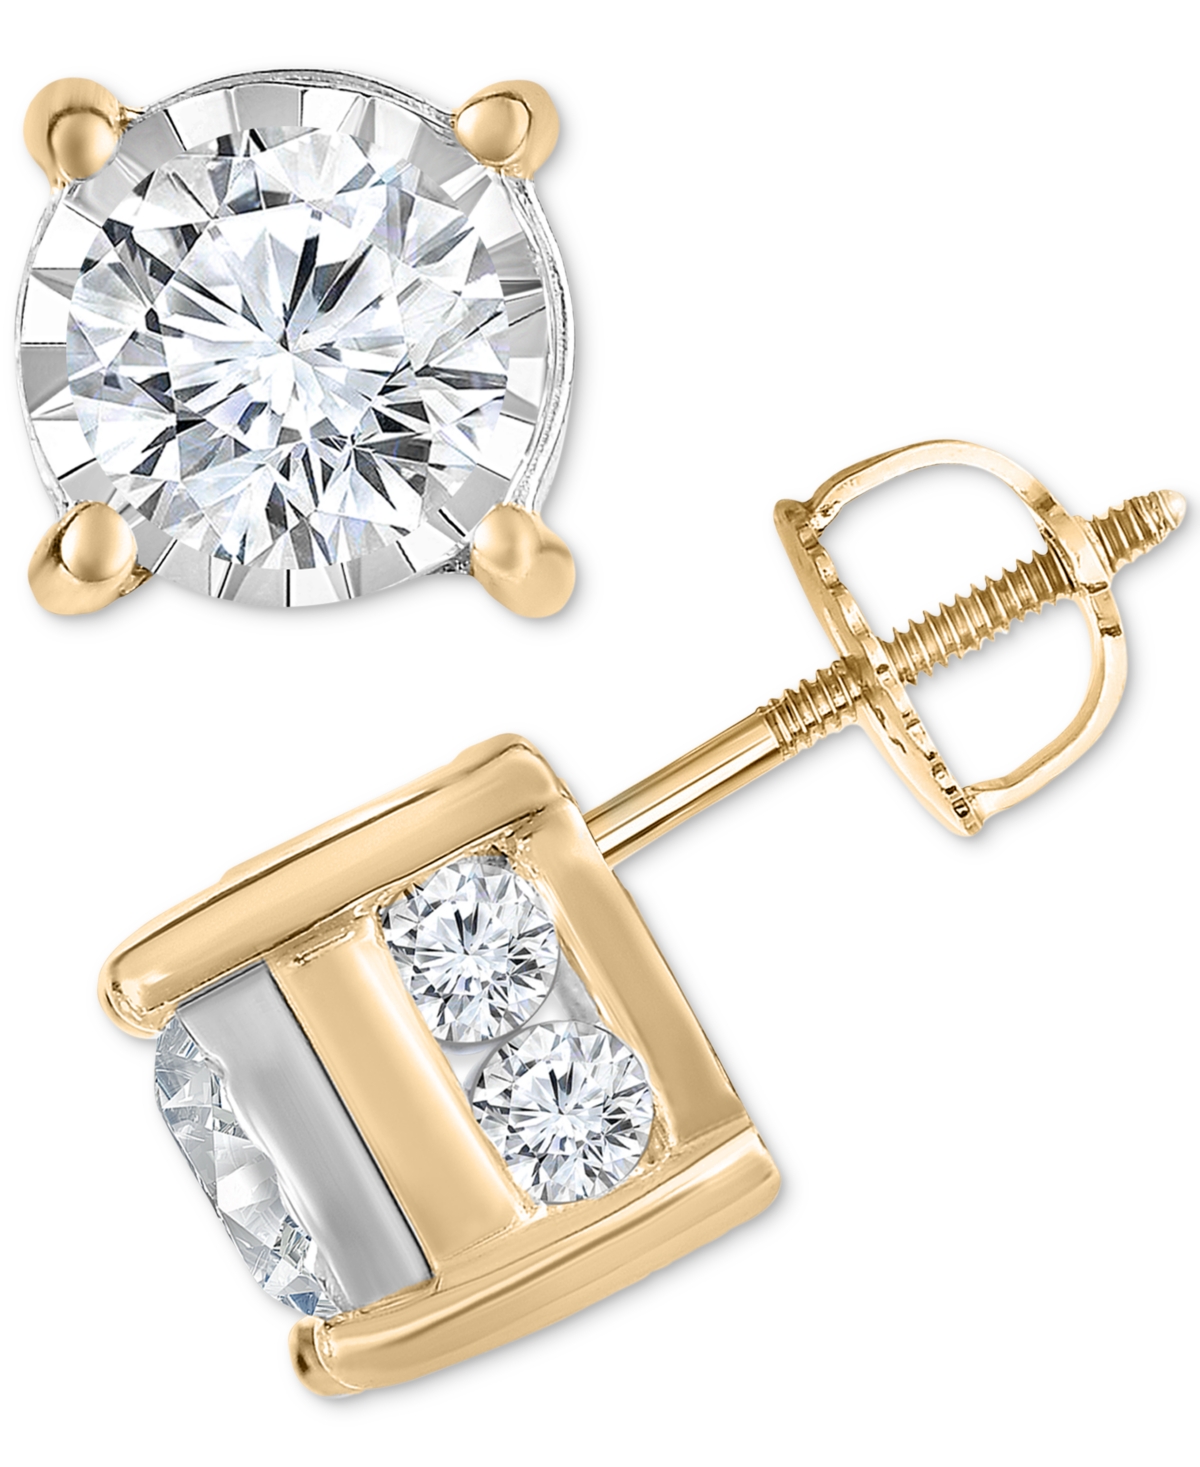 Diamond Stud Earrings (1-1/2 ct. t.w.) in 14k White, Yellow or Rose Gold - Rose Gold